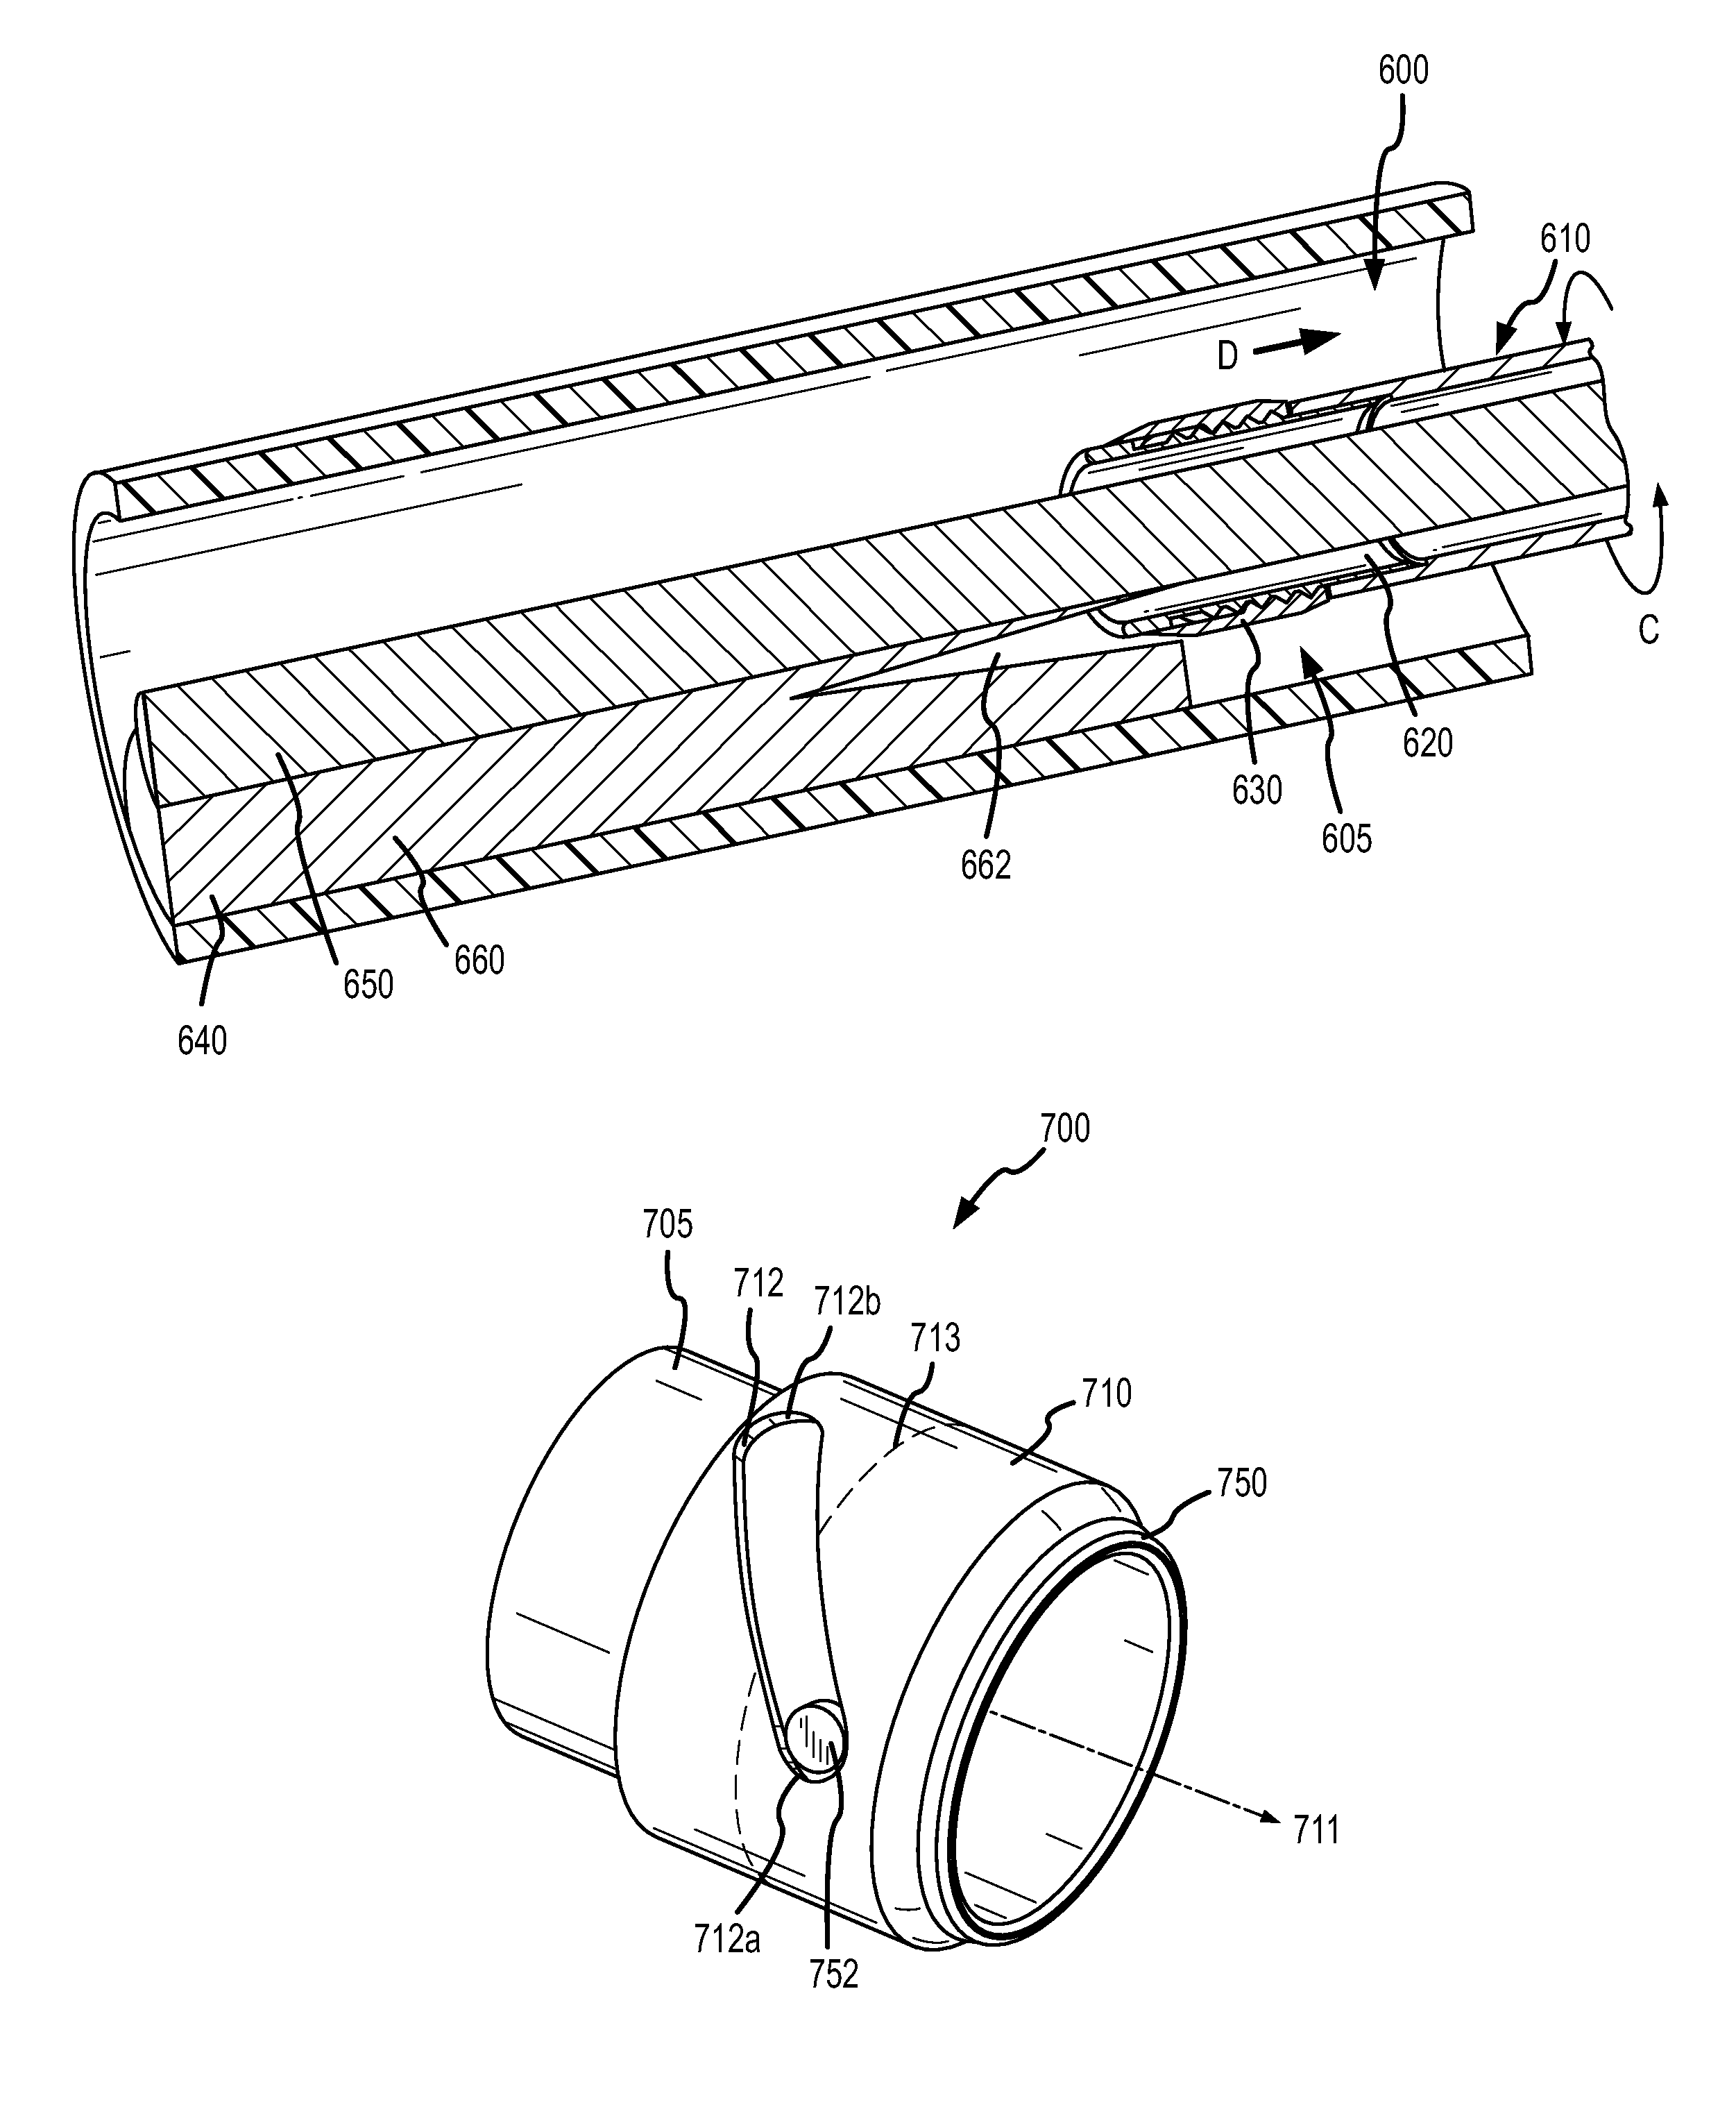 Retractable separating systems and methods